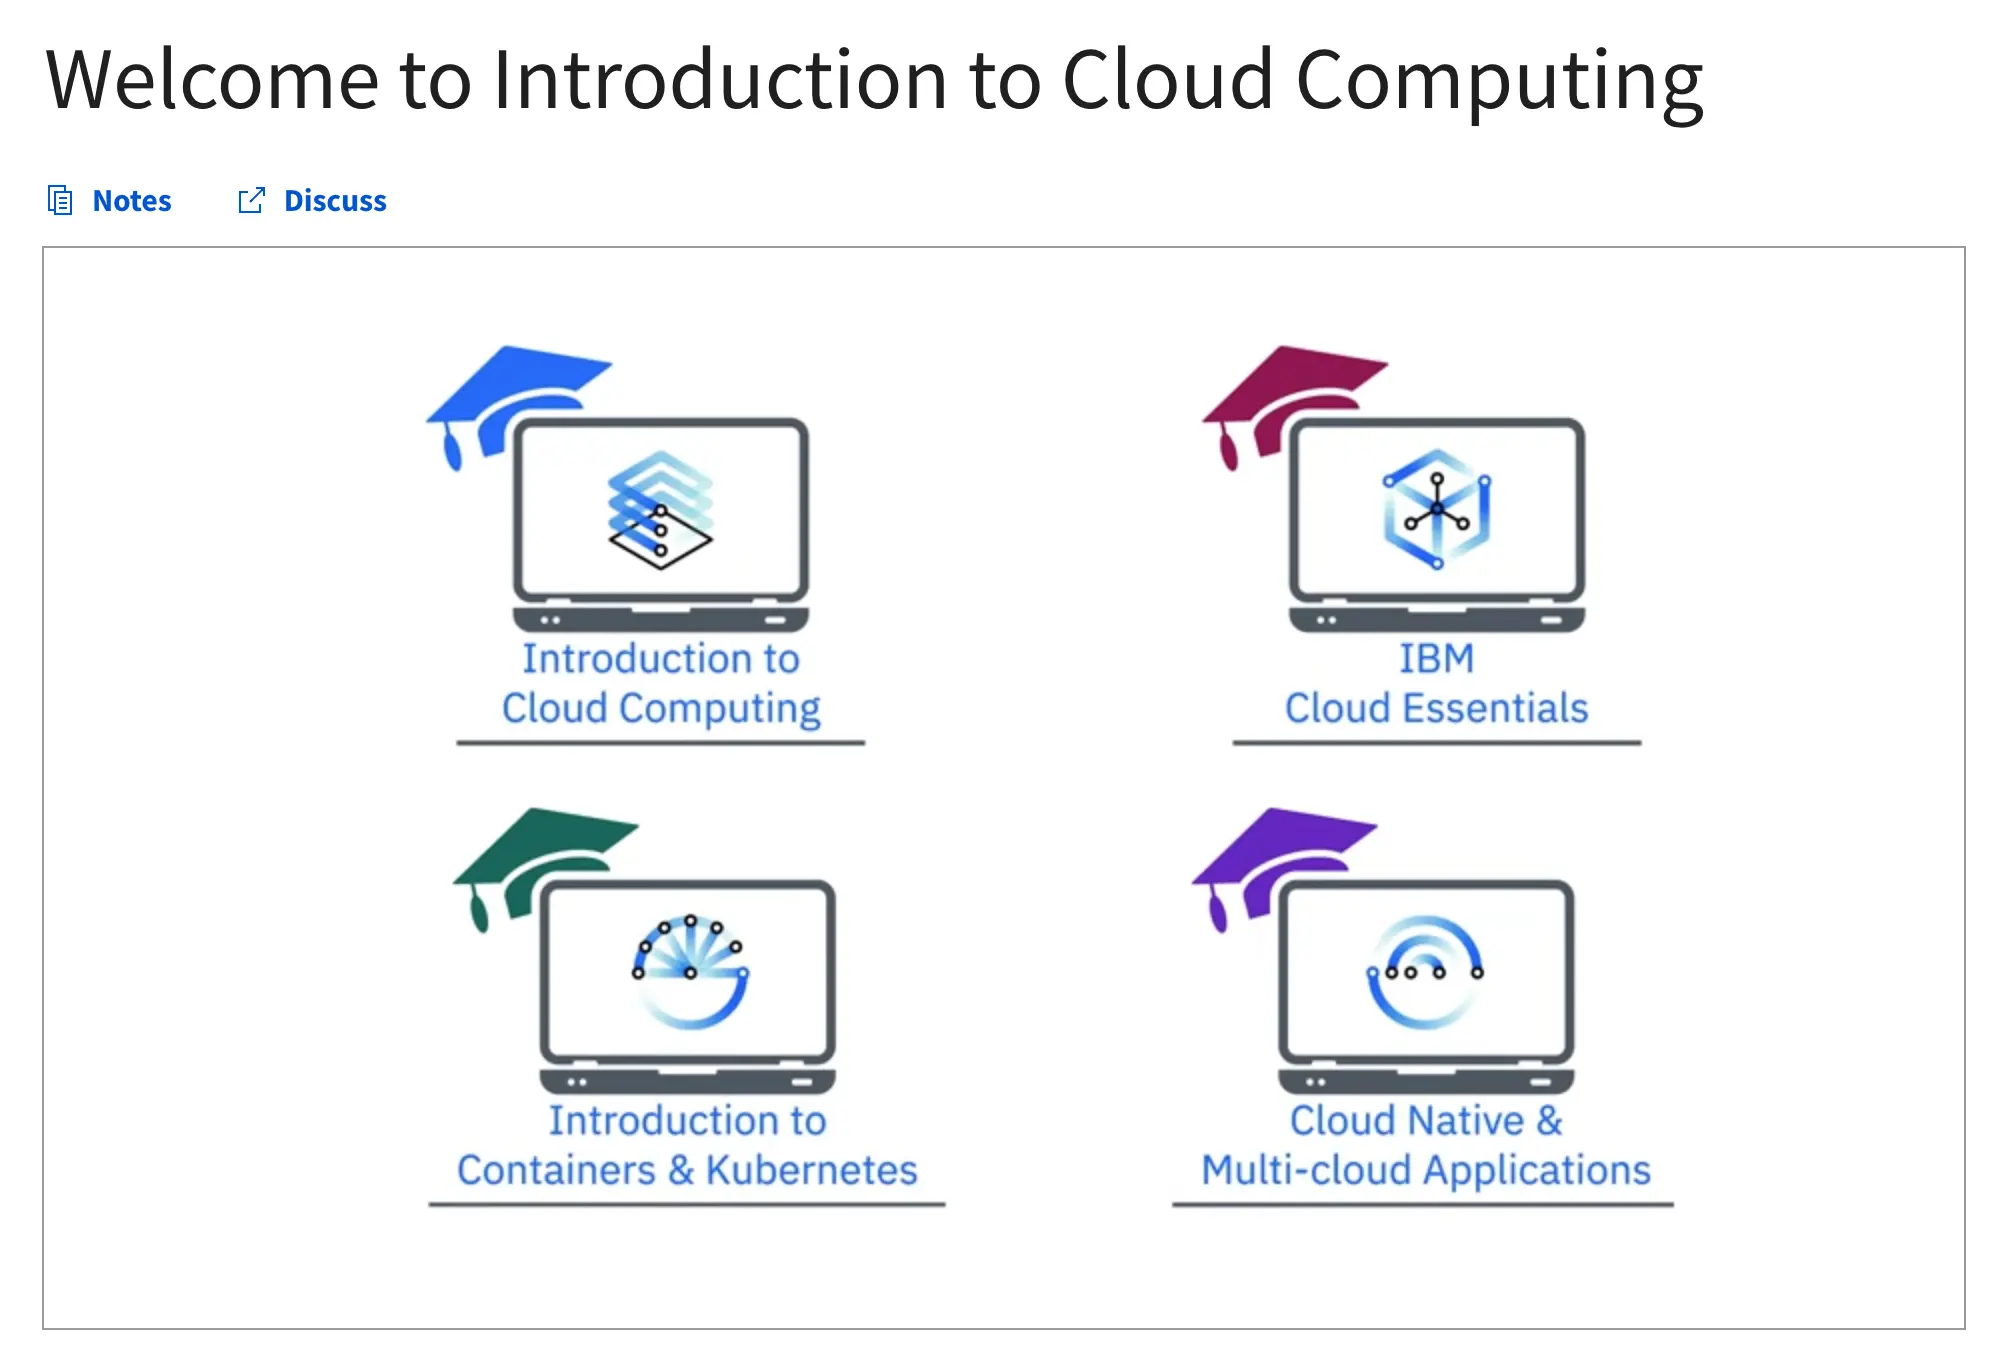 Course 1: Introduction to Cloud Computing